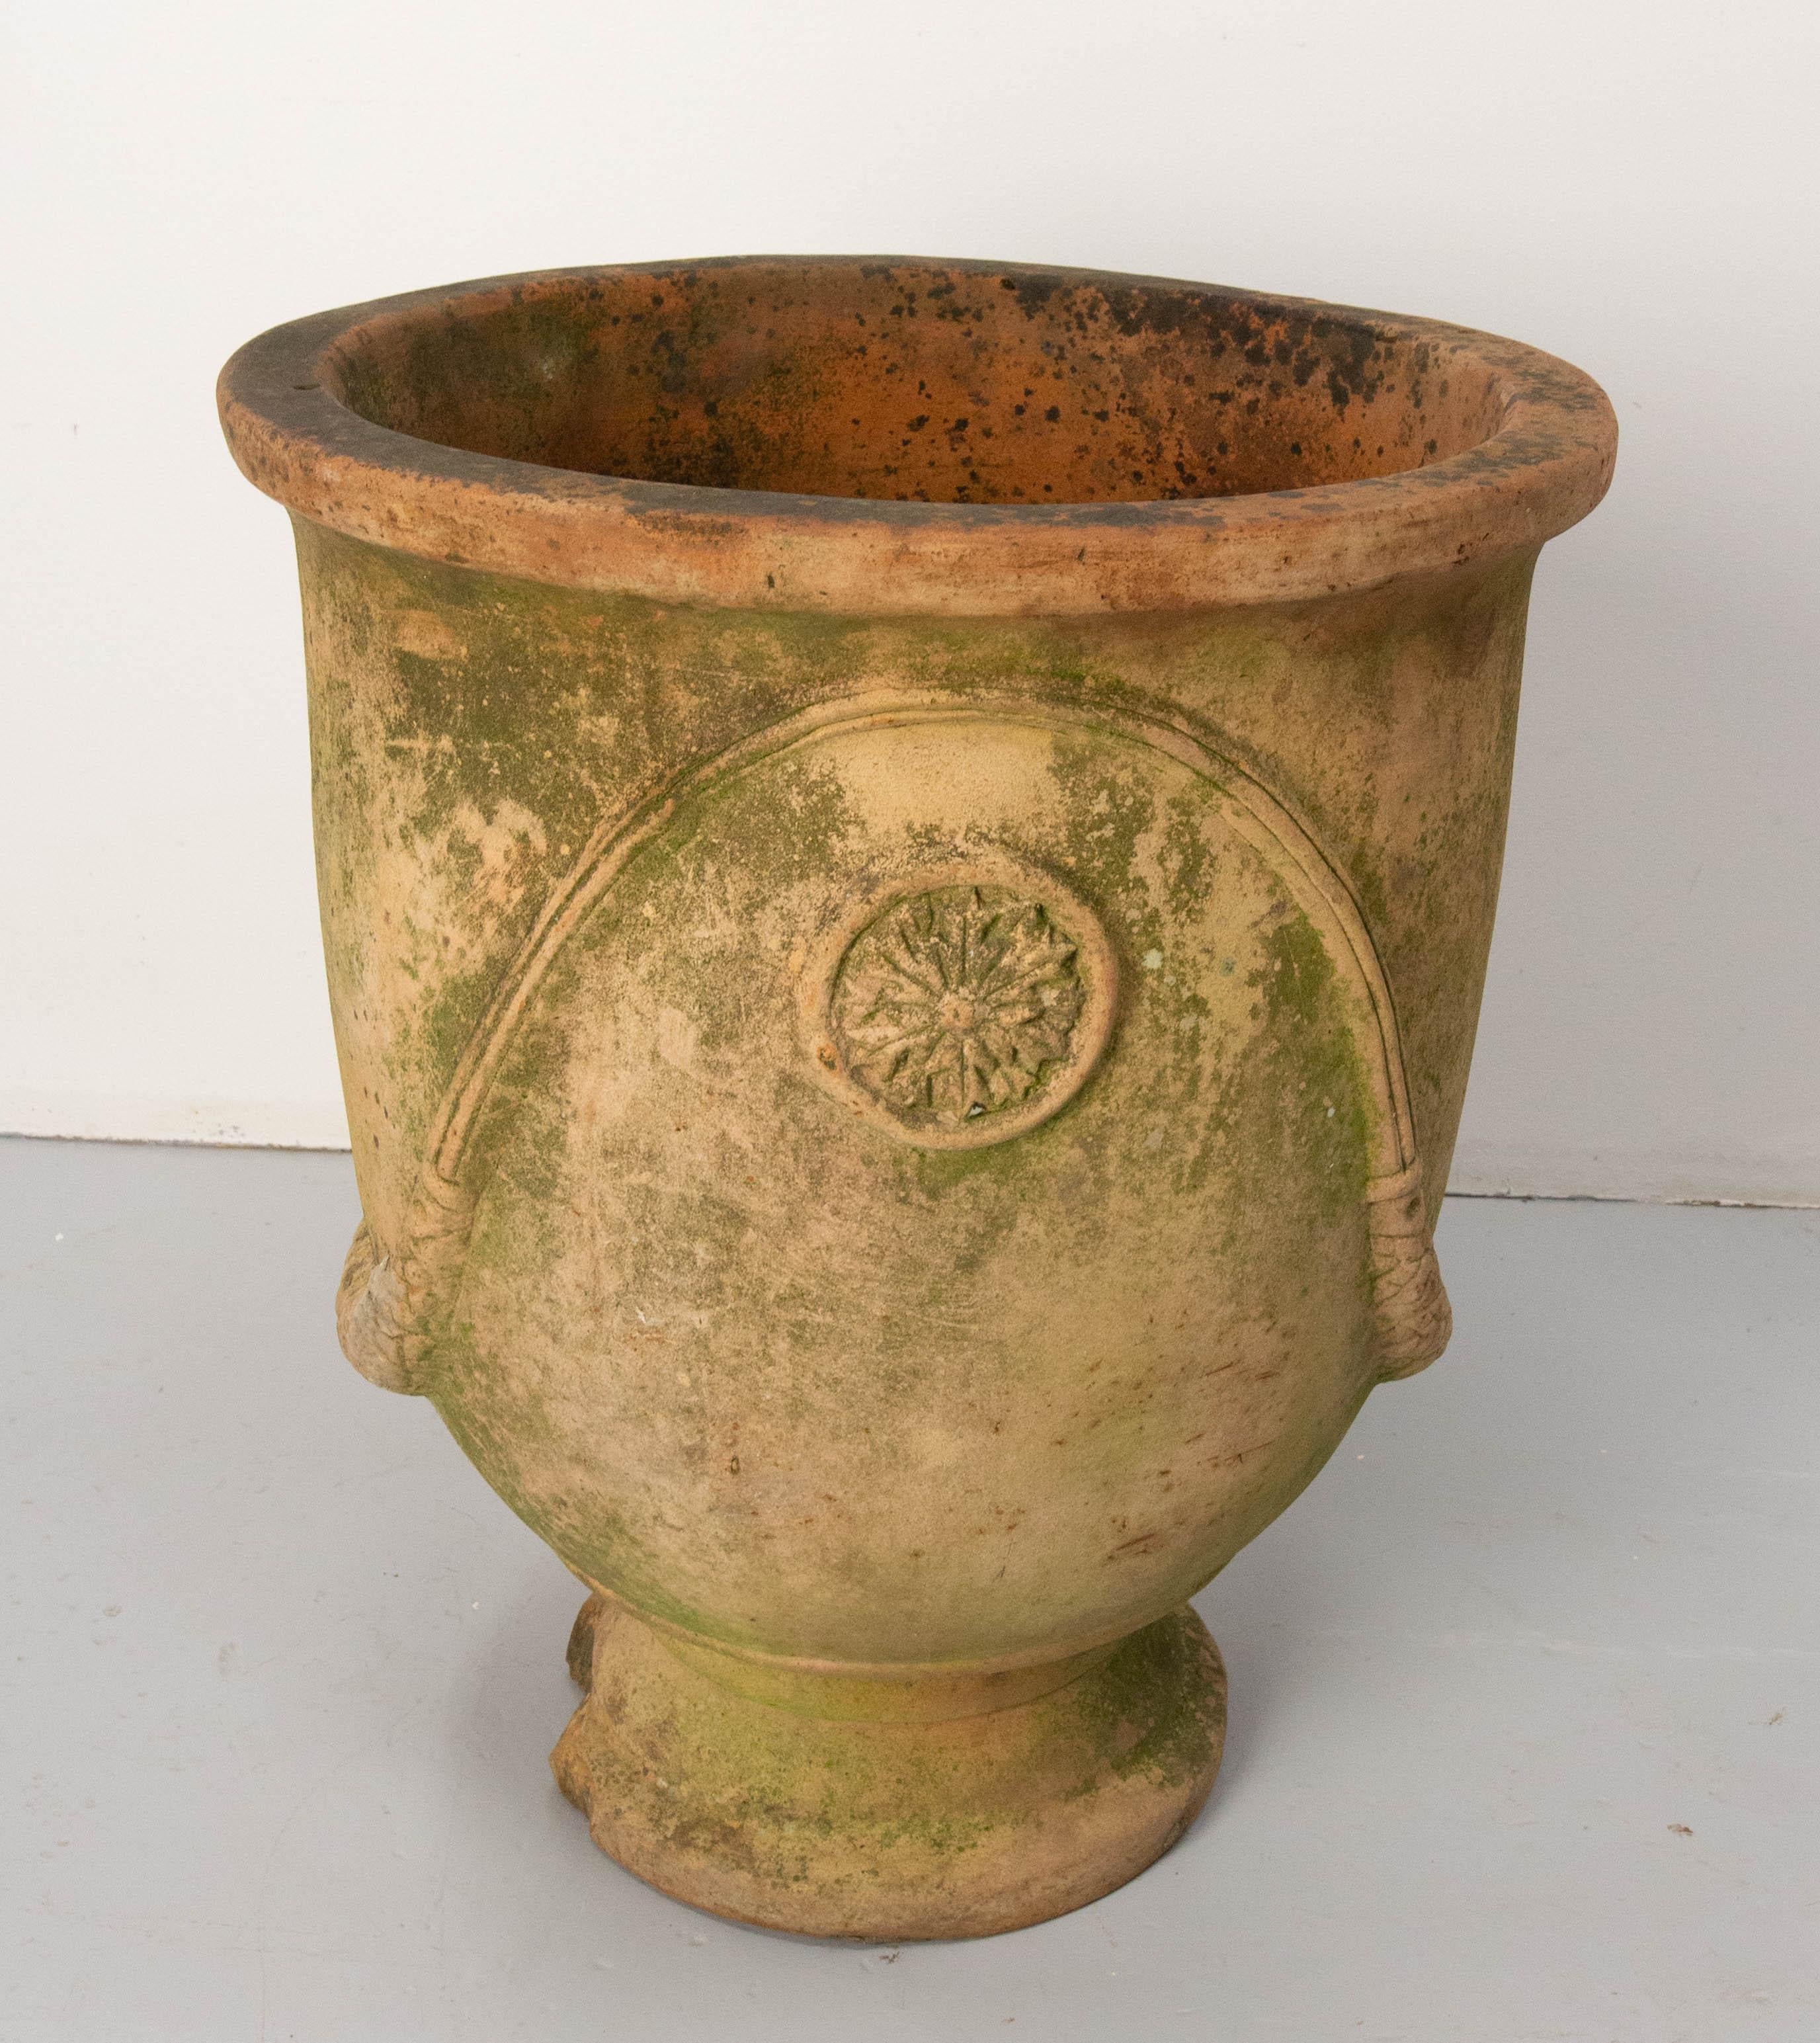 This terracotta planter is made is the Anduze style from the Boisset brothers manufacture. 
This type of vase has been made by the Boisset family at Anduze in the South of France for four centuries. A Cévennes potter was inspired by Medicis vases at